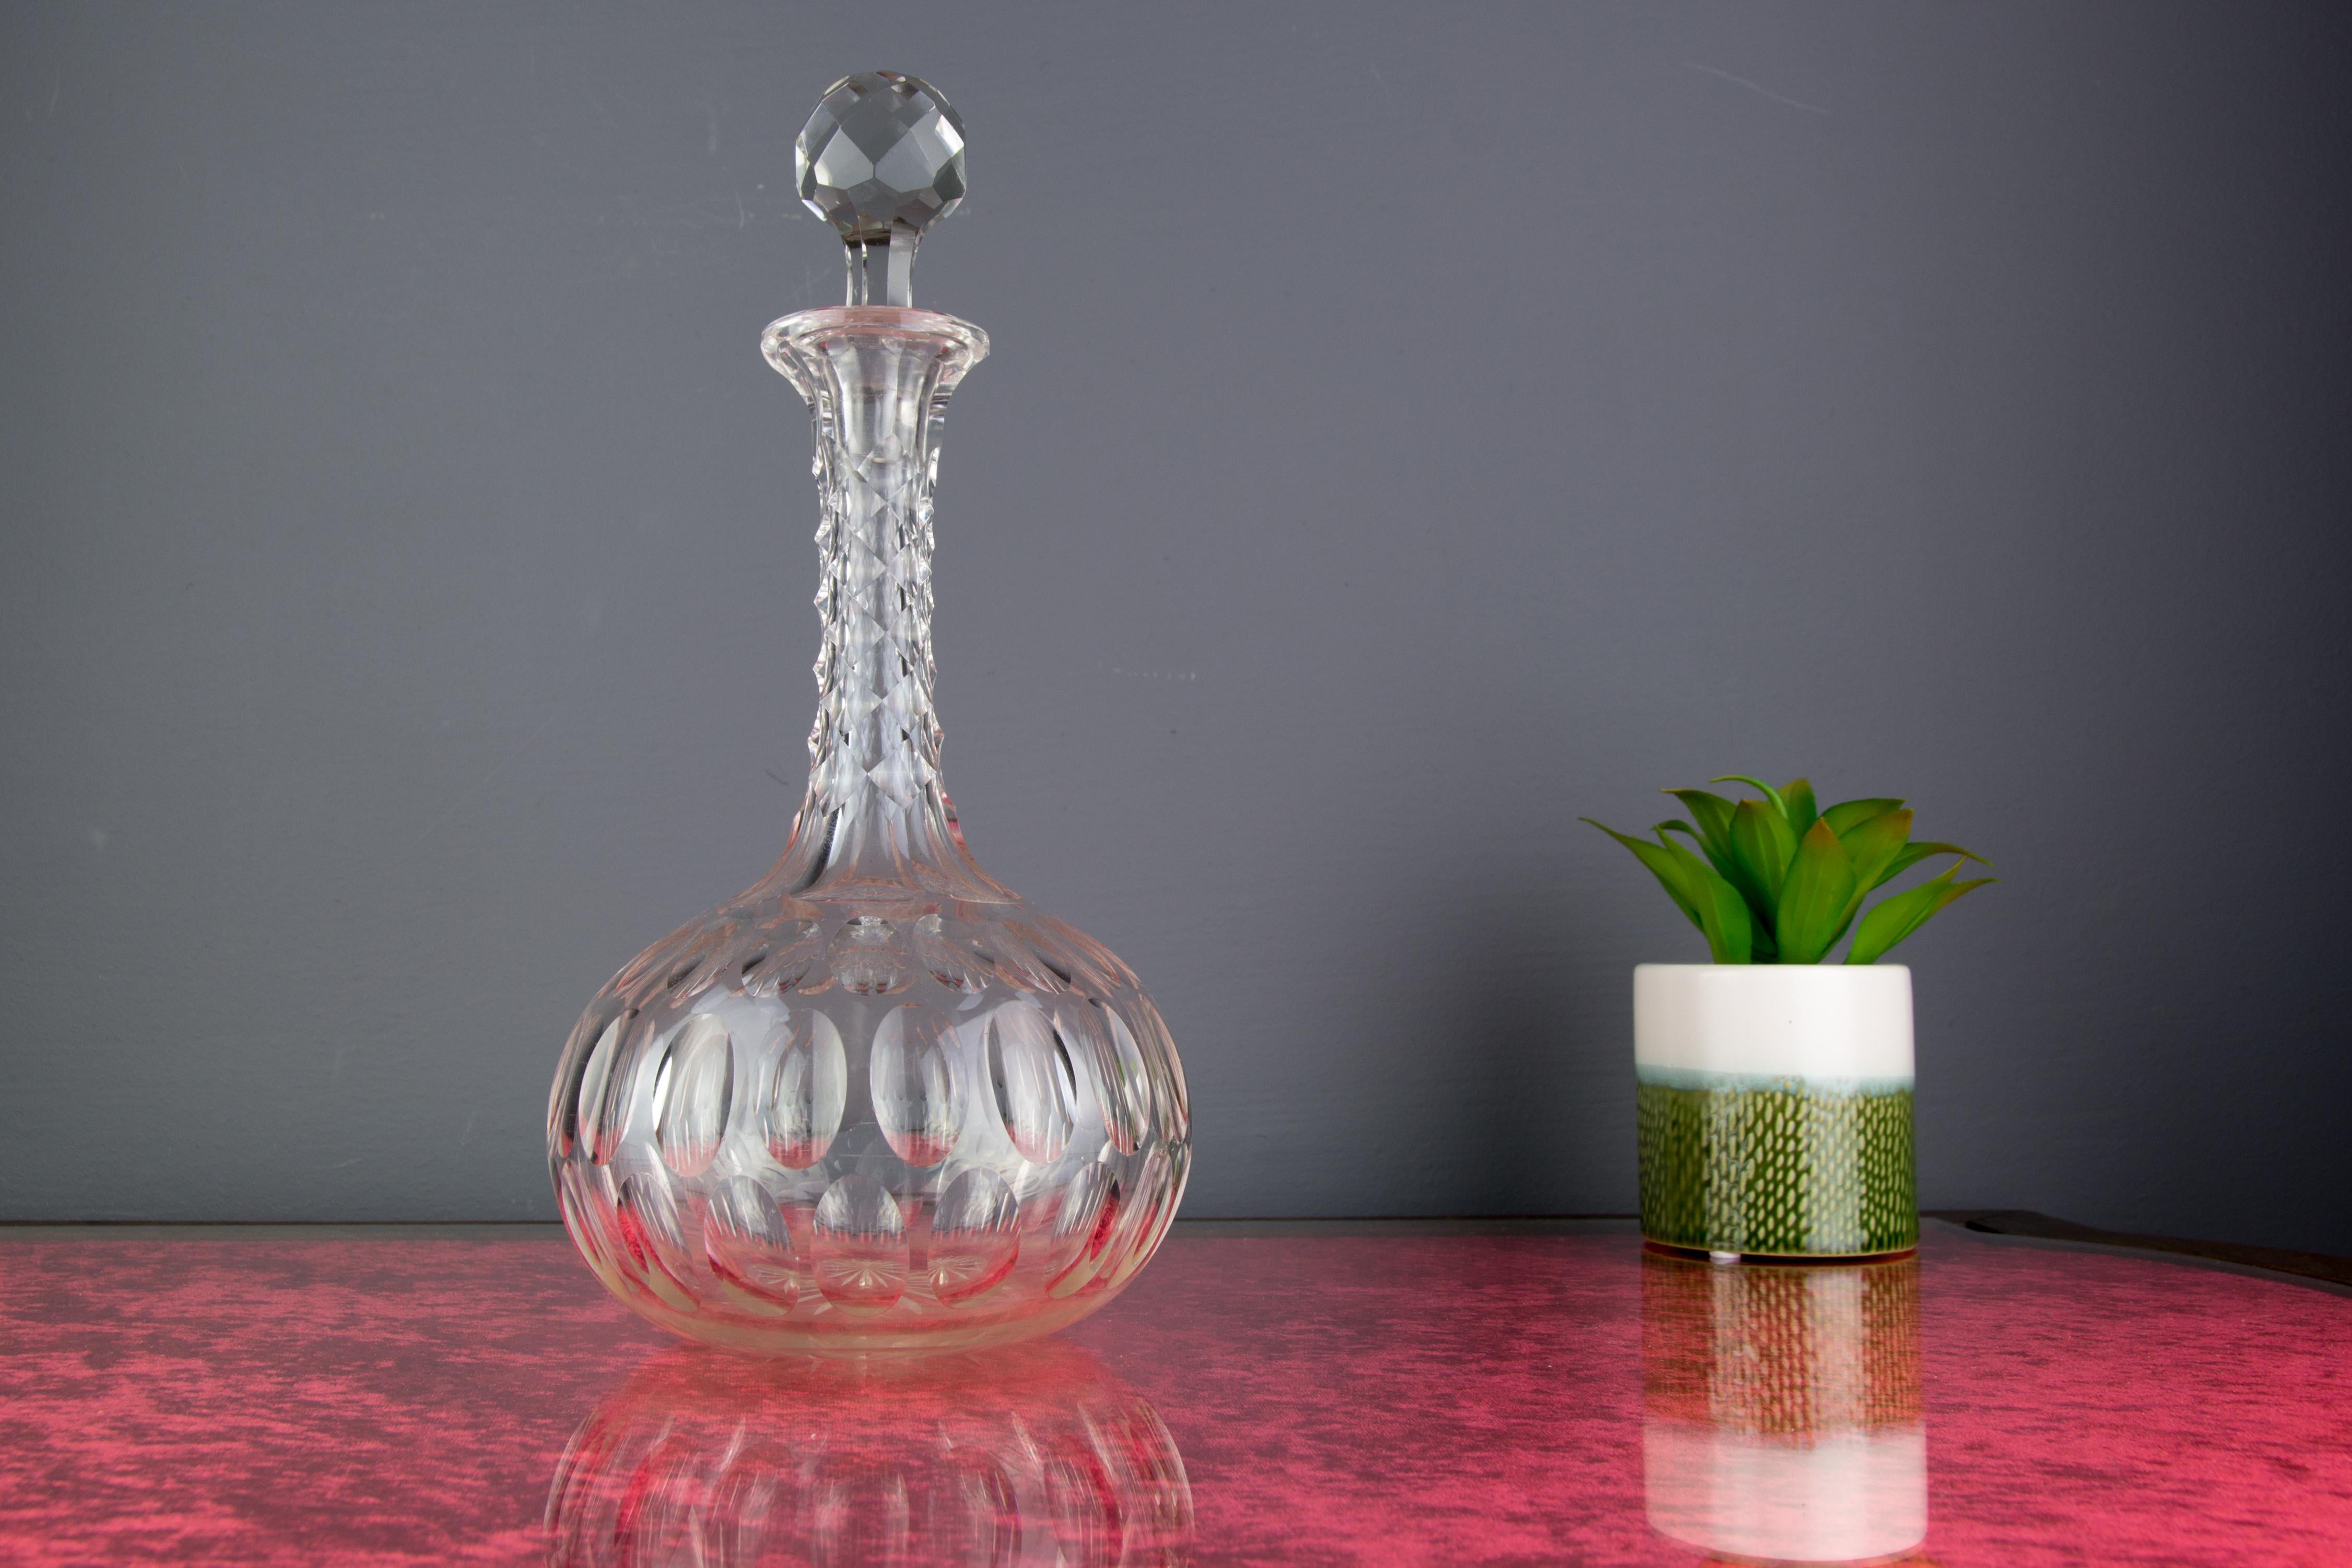 A richly cut Art Deco period crystal carafe or decanter with a beautiful olive cut pattern. Embellished with star cut to the base, faceted stopper.
Dimensions: Height: 25 cm / 9.84 in (without stopper), 31.5 cm / 12.4 in (with stopper); diameter: